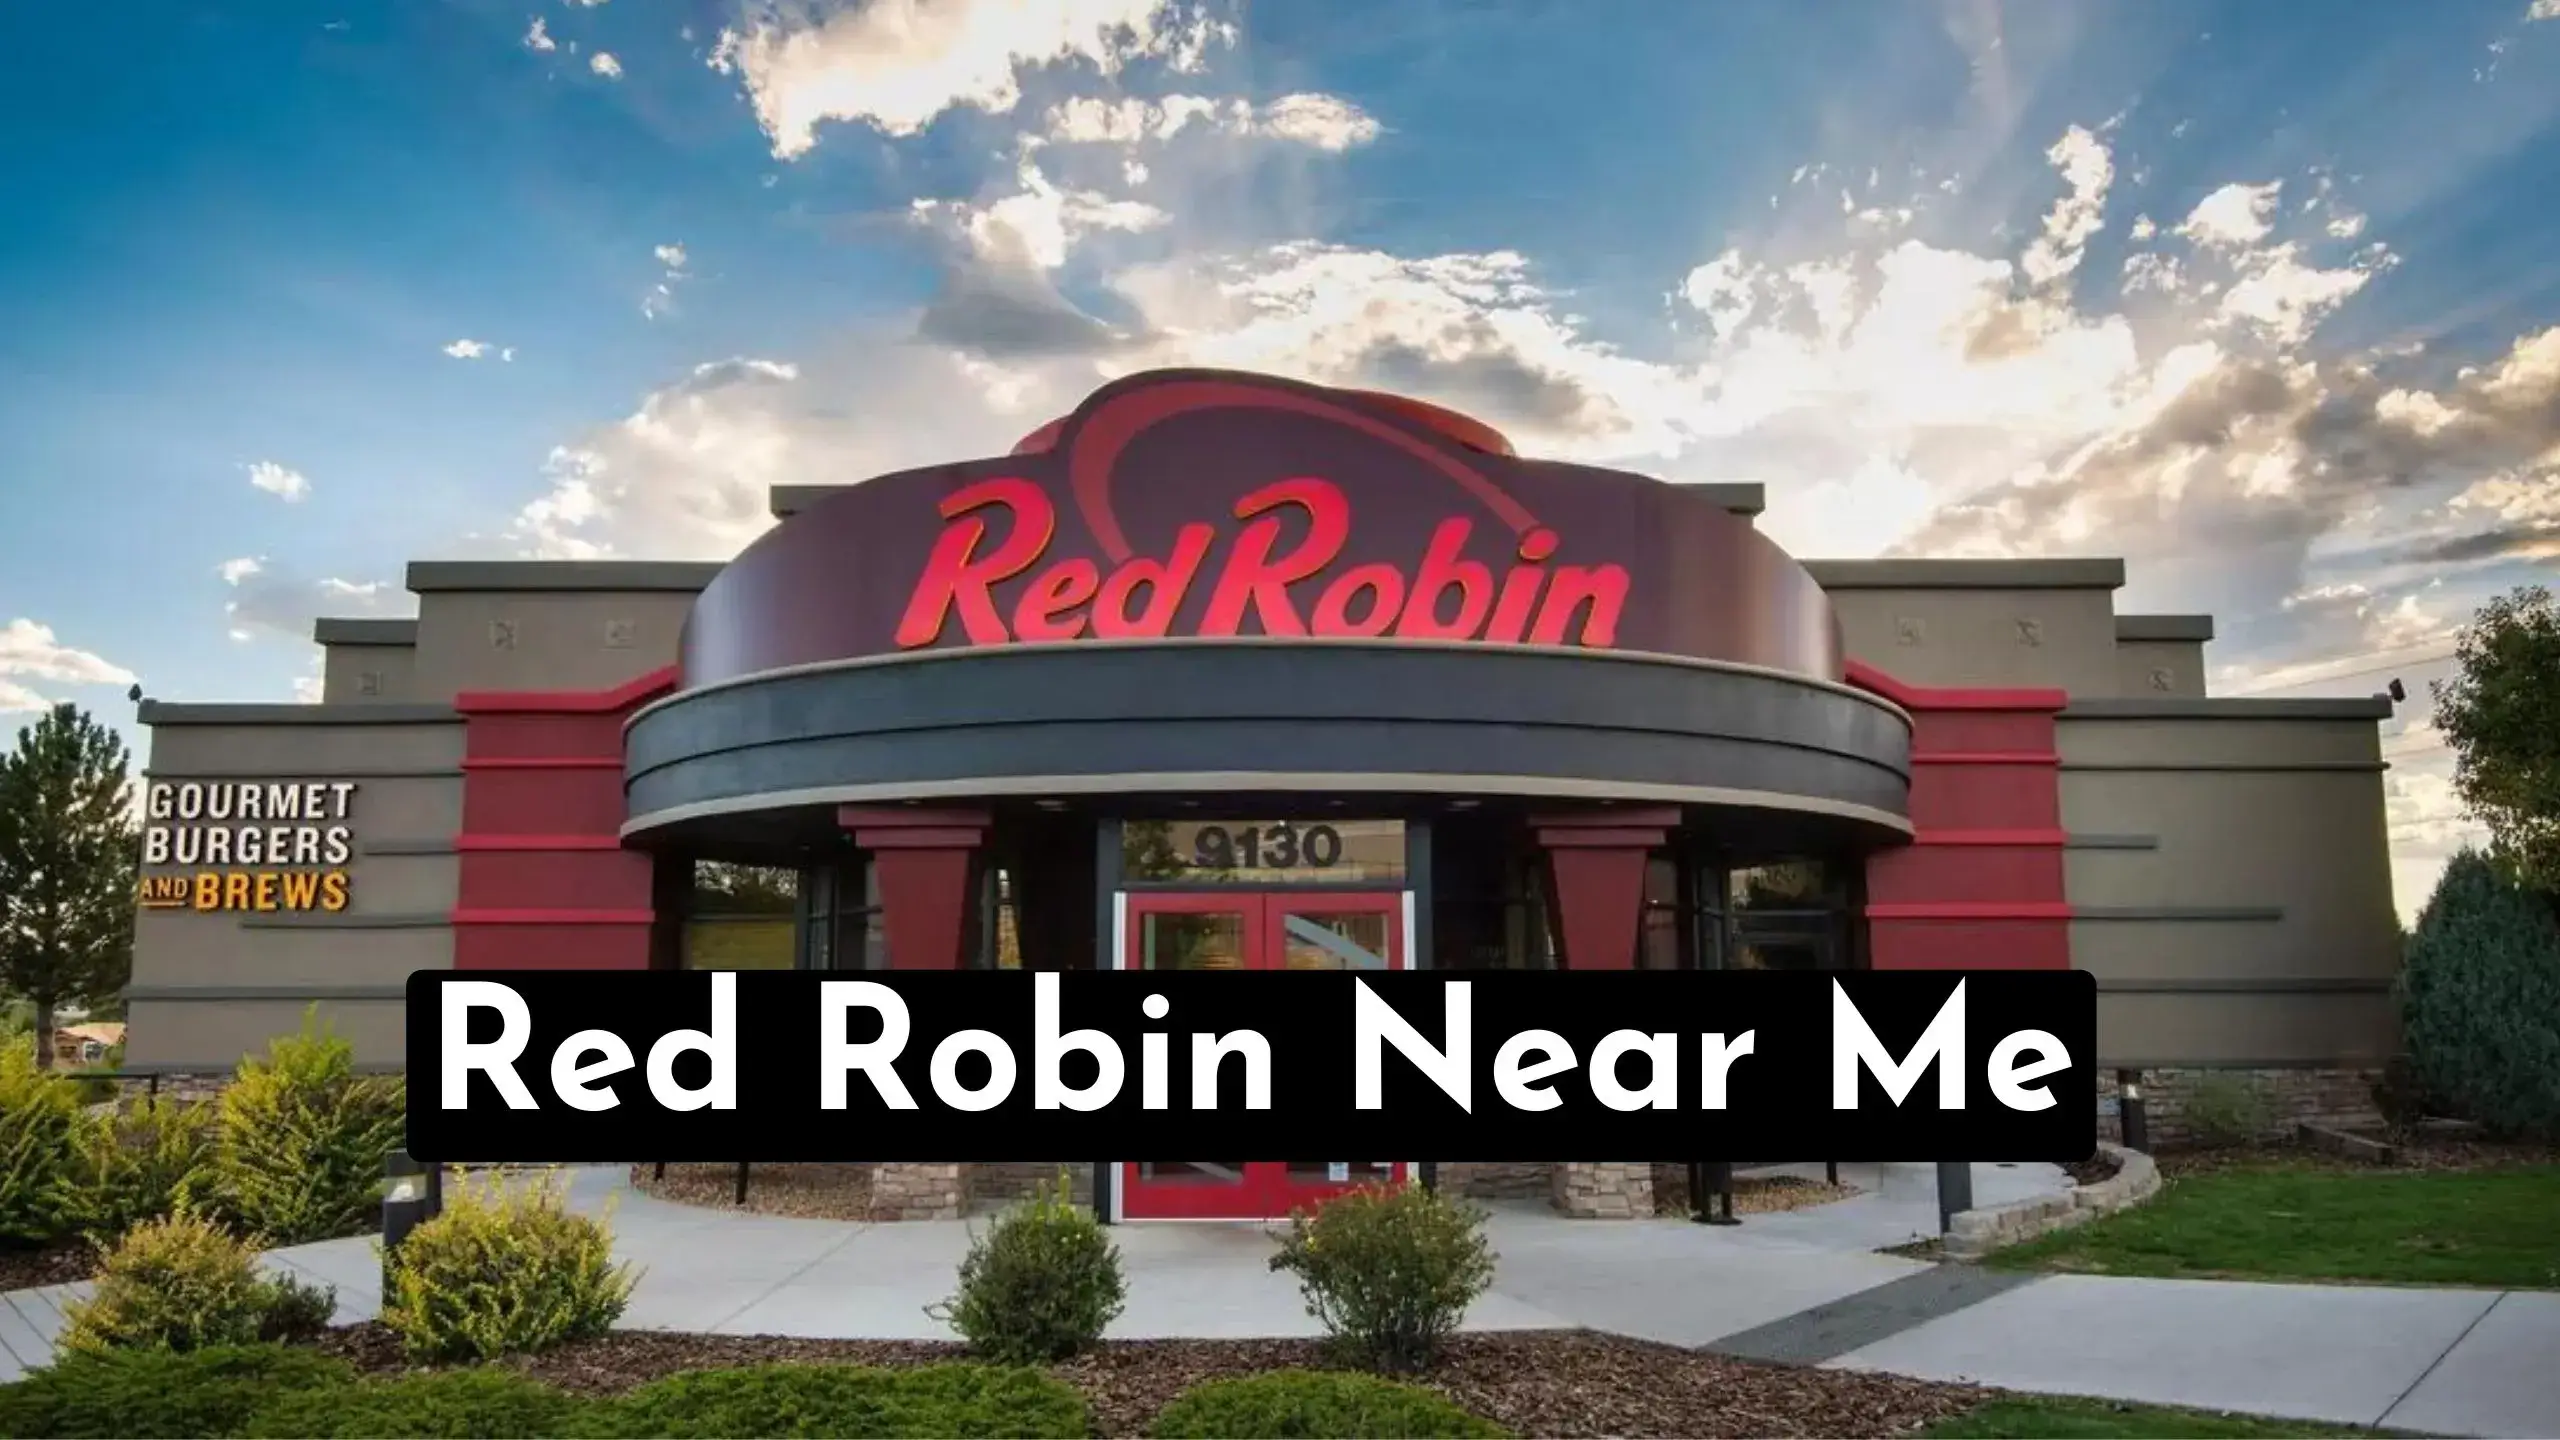 Find Red Robin Near Me Locations & Save 50% Off On Your Next Meal | Enjoy The Iconic Burgers & Gourmet By Visiting The Nearest Red Robin.